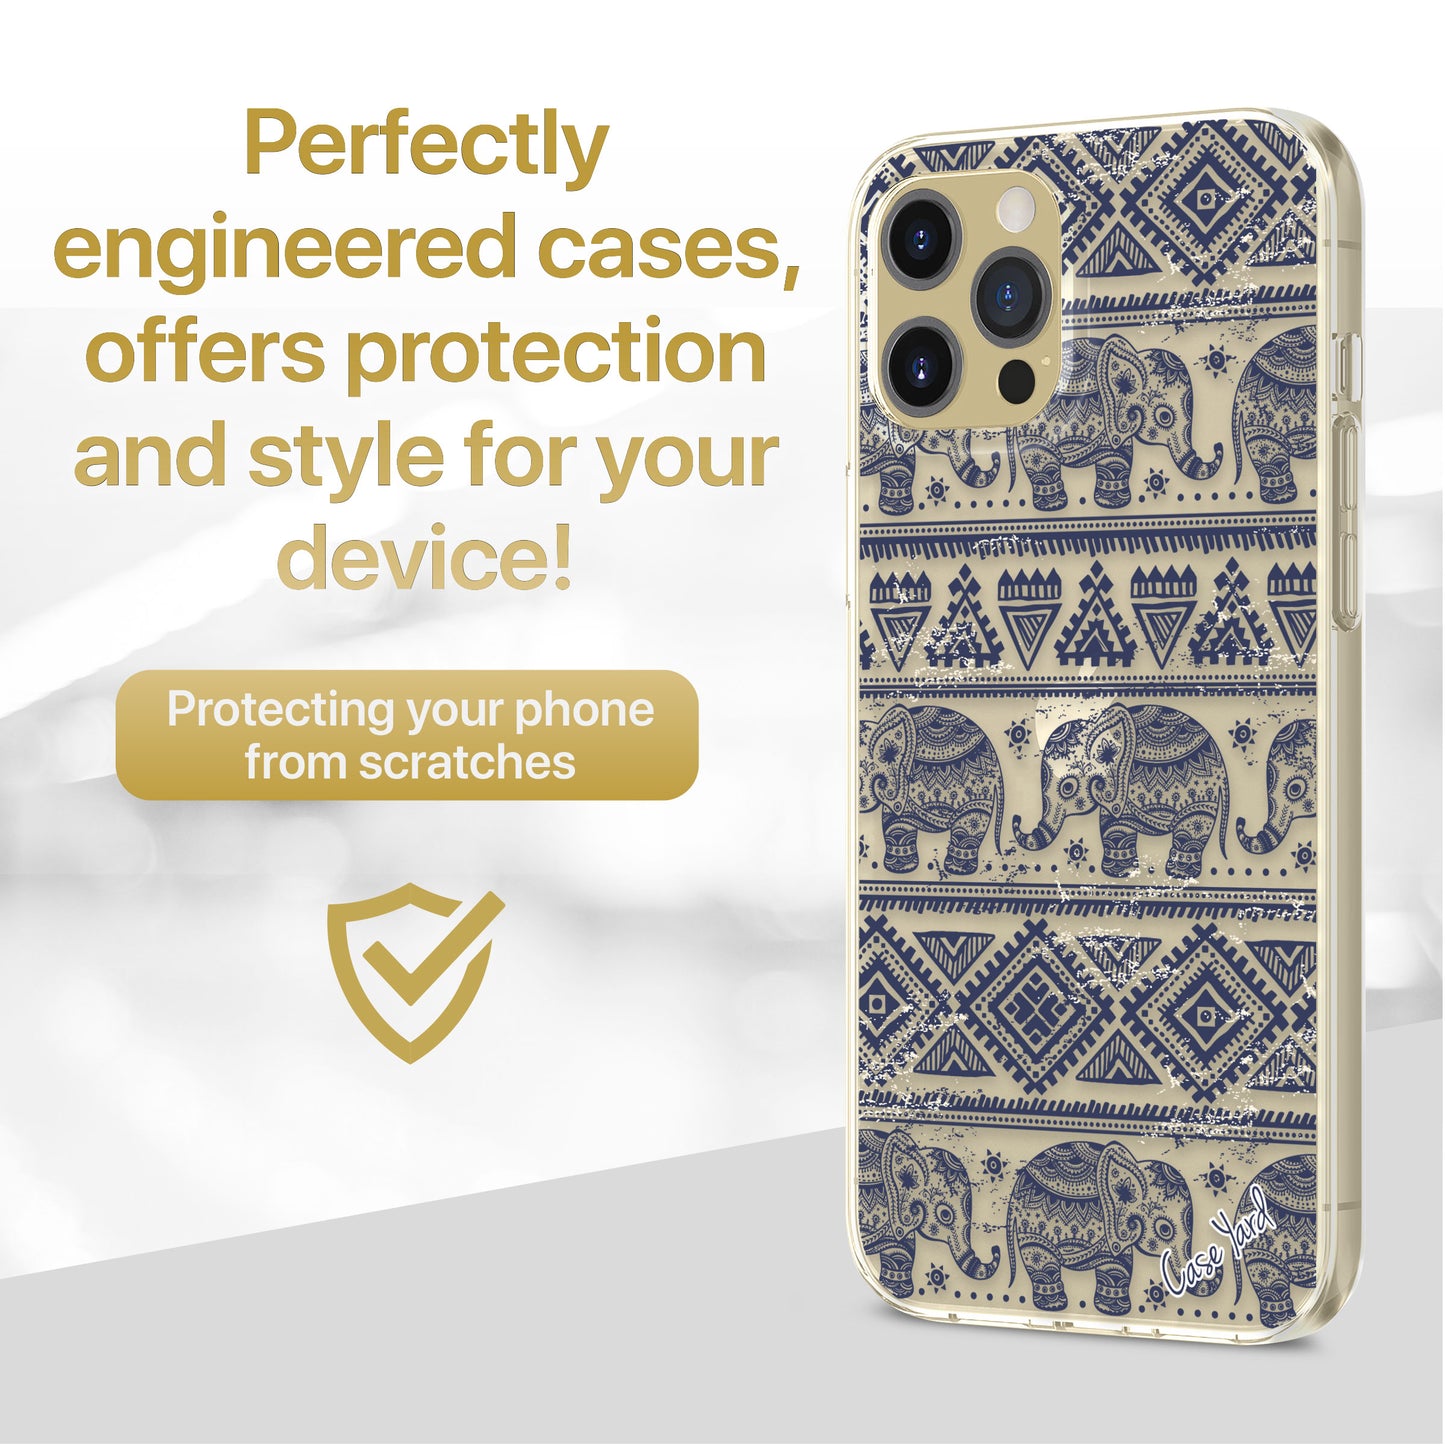 TPU Clear case with (Elephant Pattern) Design for iPhone & Samsung Phones